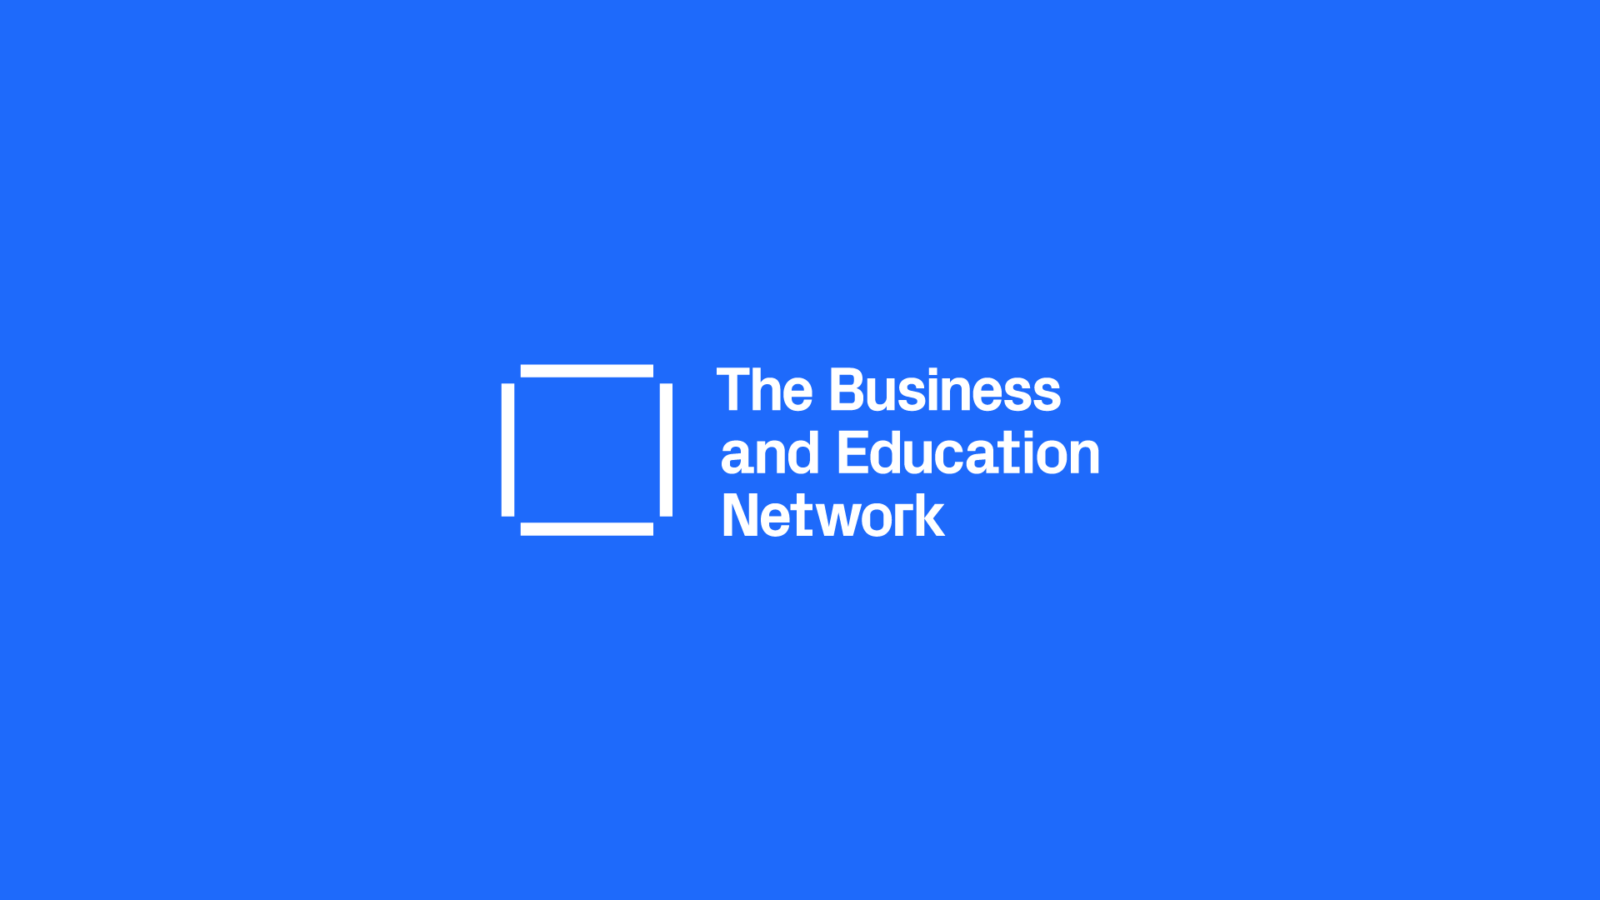 The Business and Education Network